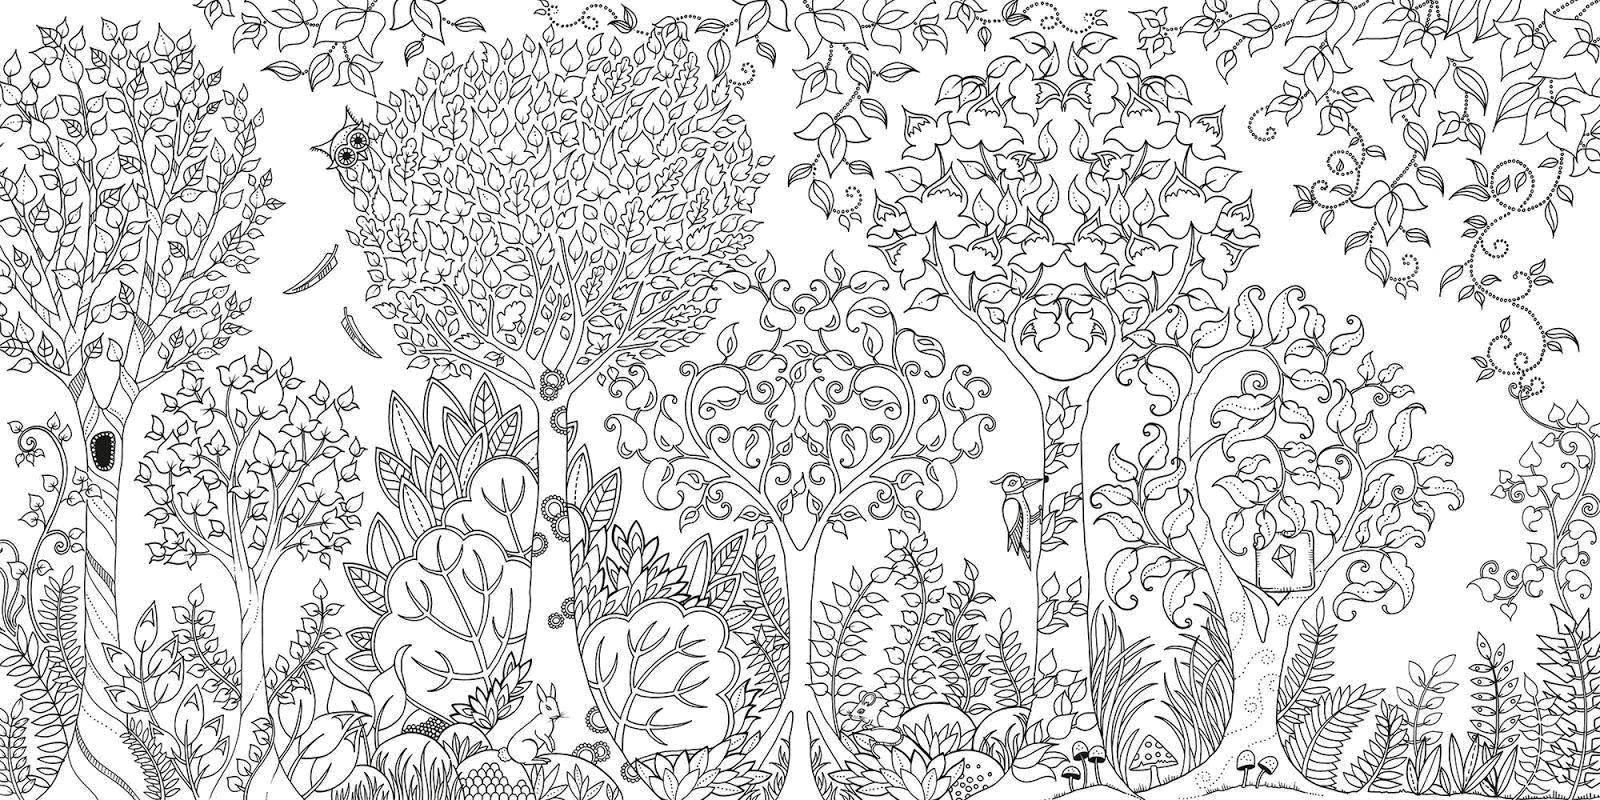 Coloring Fairy forest. Category Nature. Tags:  Nature, forest, patterns, fairy tale.